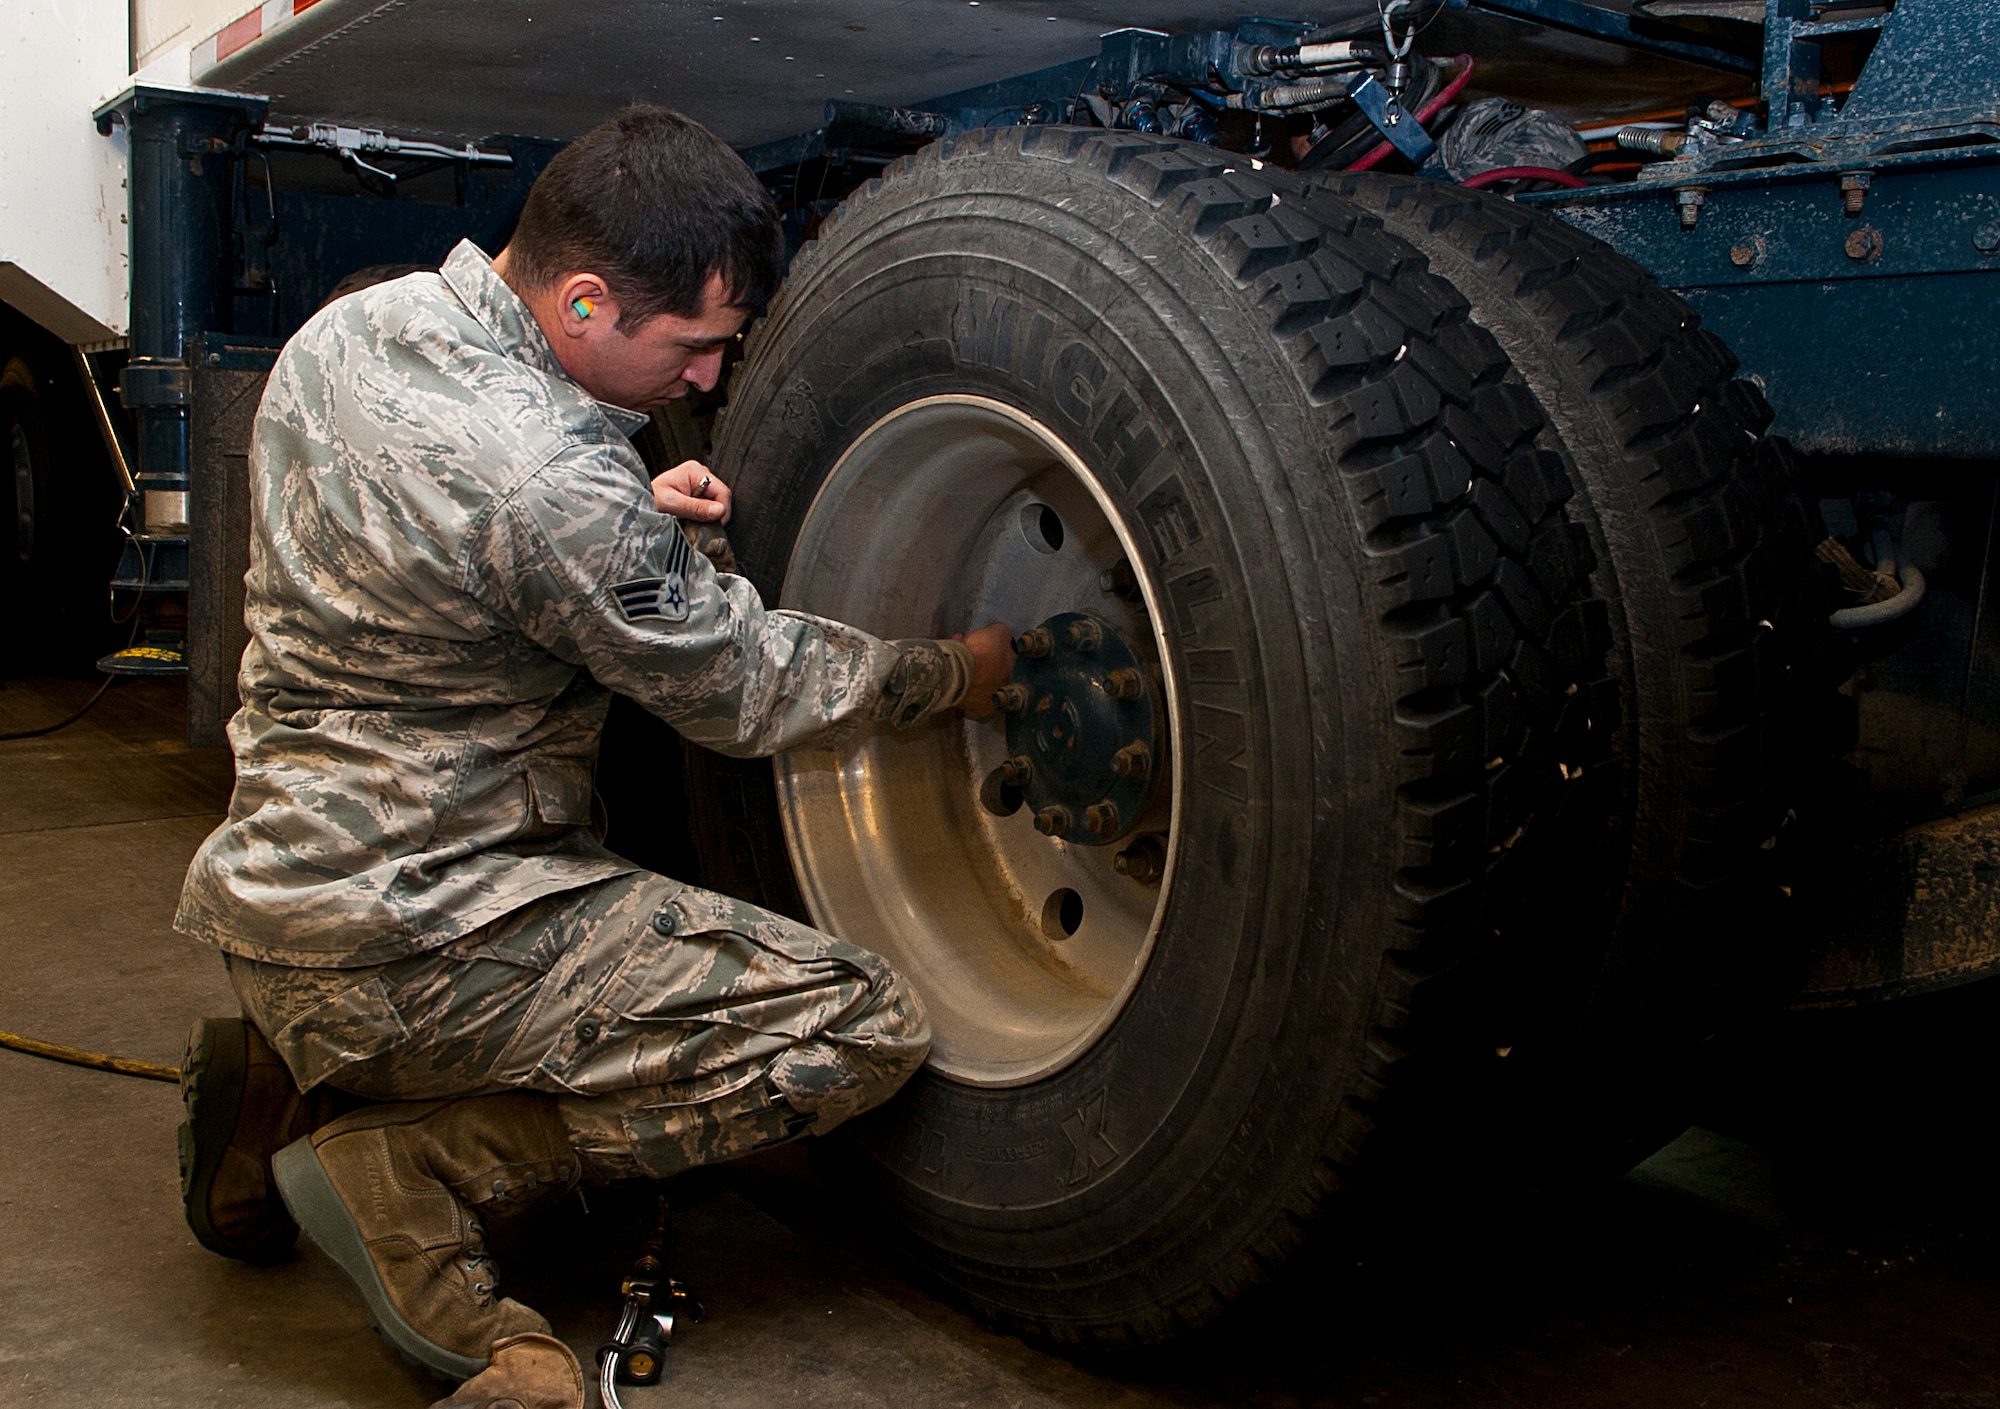 Senior Airman Francisco Perez, 91st Missile Maintenance Squadron missile handling team technician, inspects tire lugs on a transporter erector at Minot Air Force Base, N.D., Jan. 19, 2017. The MHT oversees the shipping and receiving of nuclear capable Minuteman missiles and is responsible for transporting them to-and-from a launch facility. (U.S. Air Force photo/Airman 1st Class Jonathan McElderry)